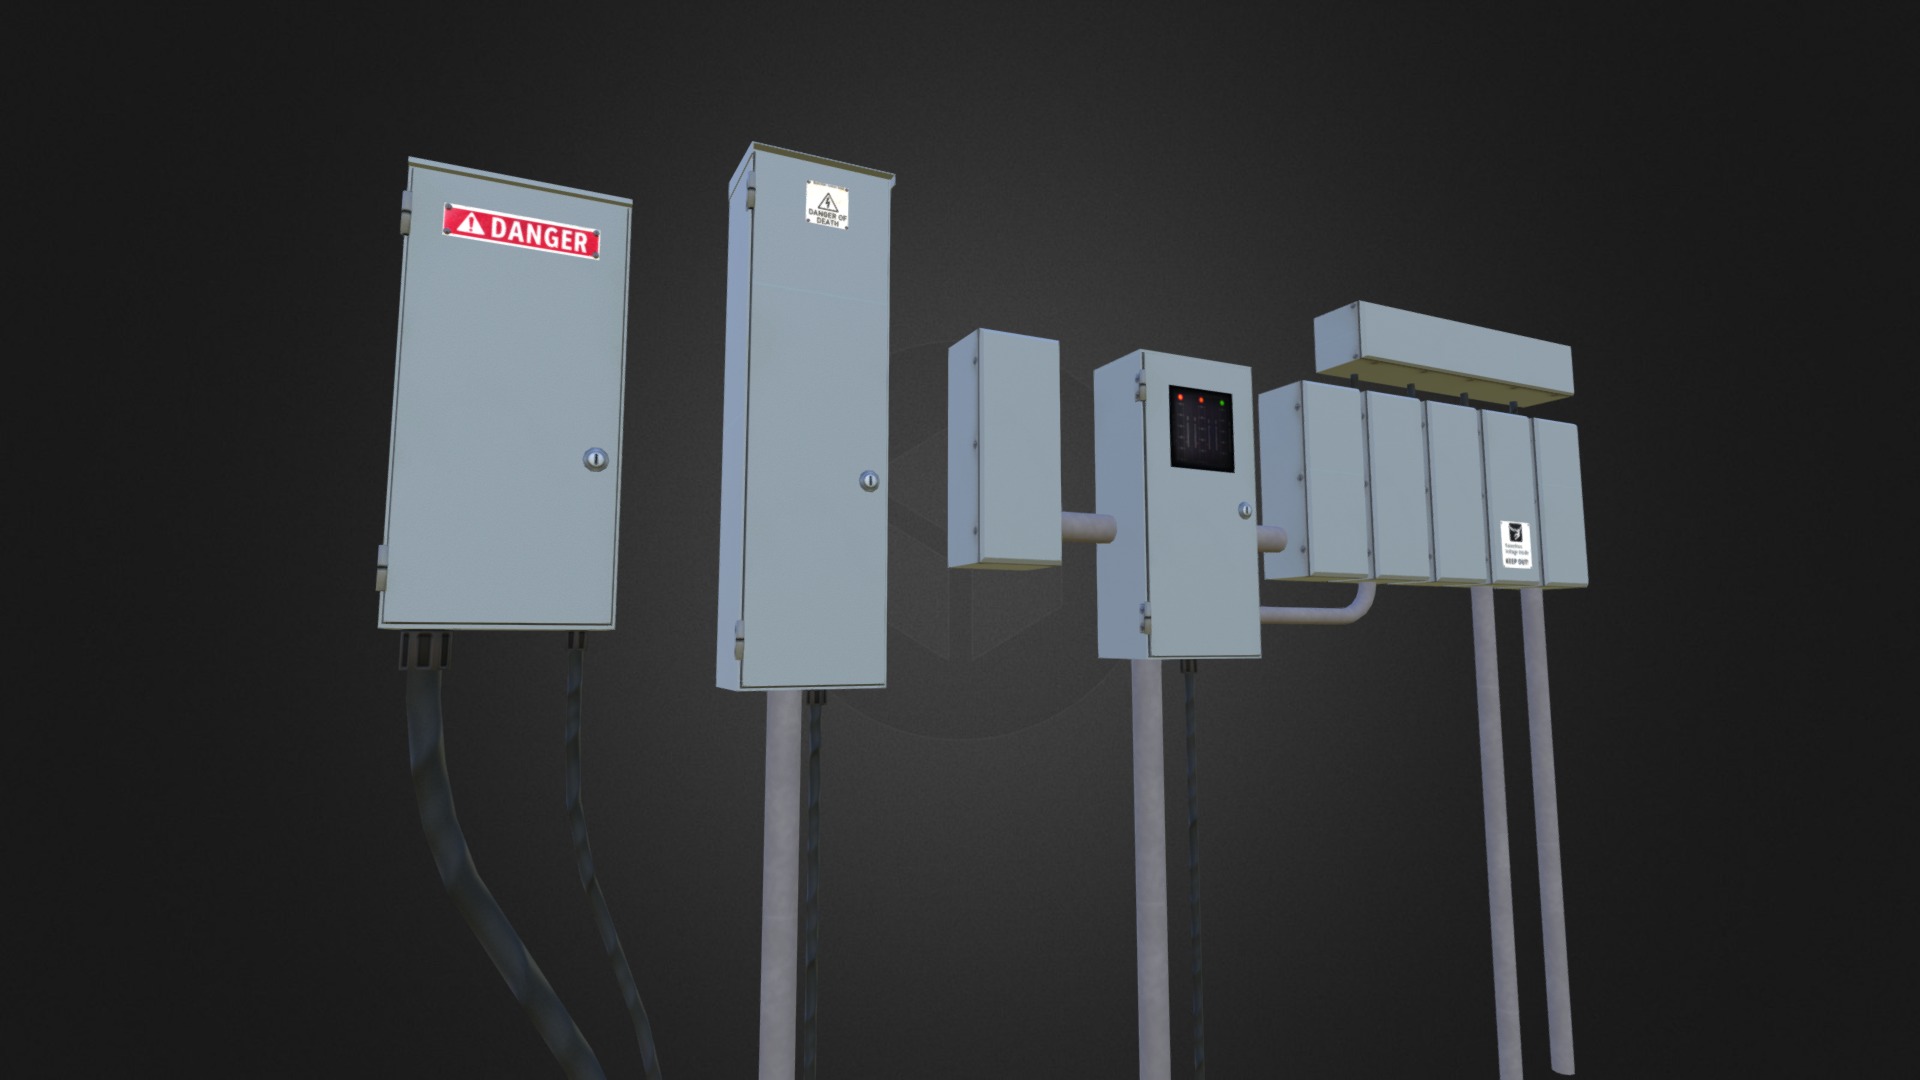 3D model Electrical Control Panel #2 - This is a 3D model of the Electrical Control Panel #2. The 3D model is about several white electrical devices.